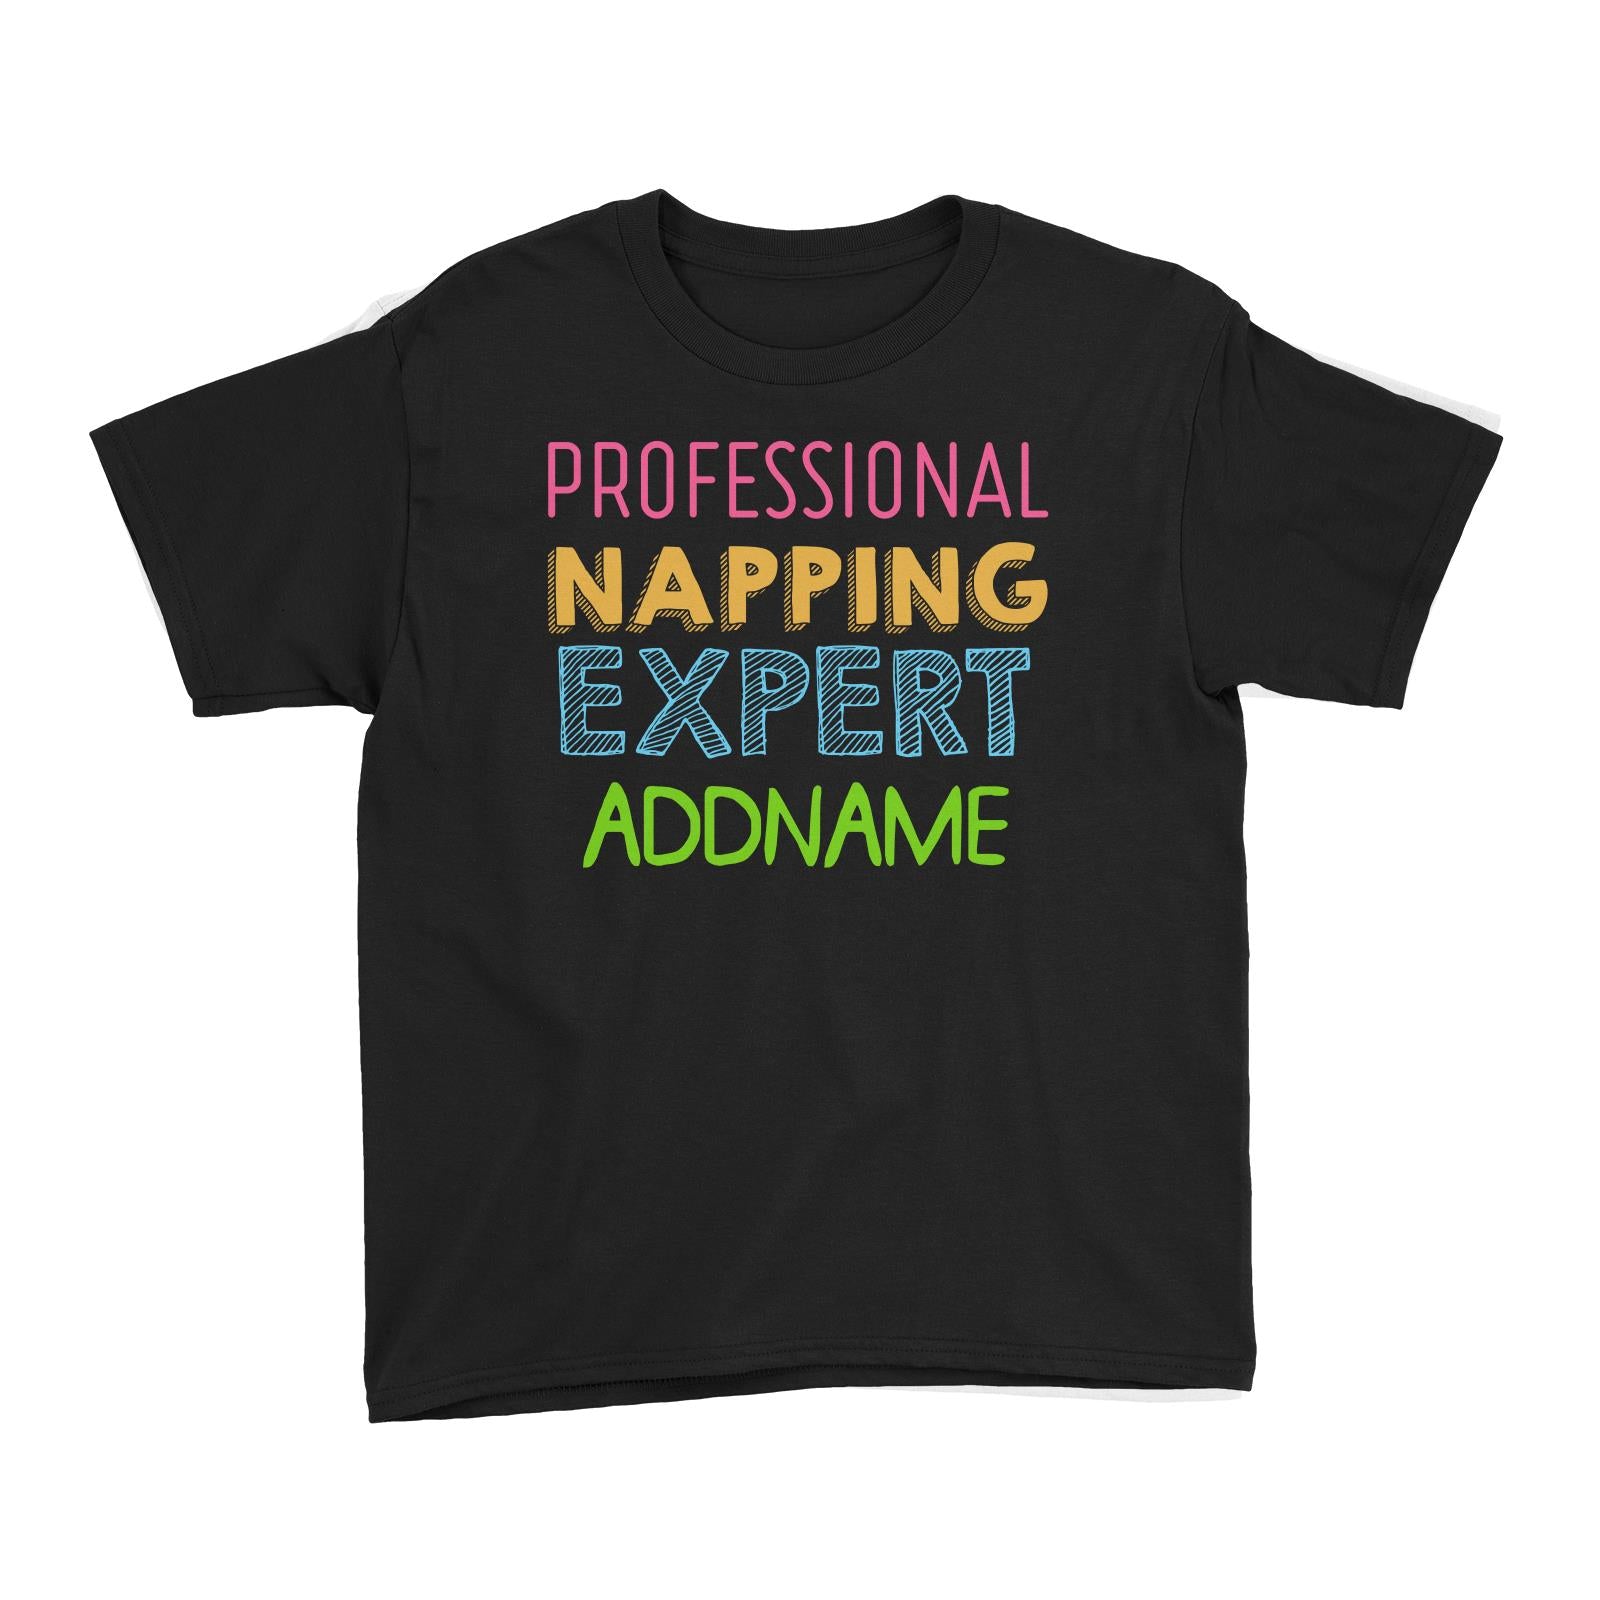 Professional Napping Expert Addname Kid's T-Shirt